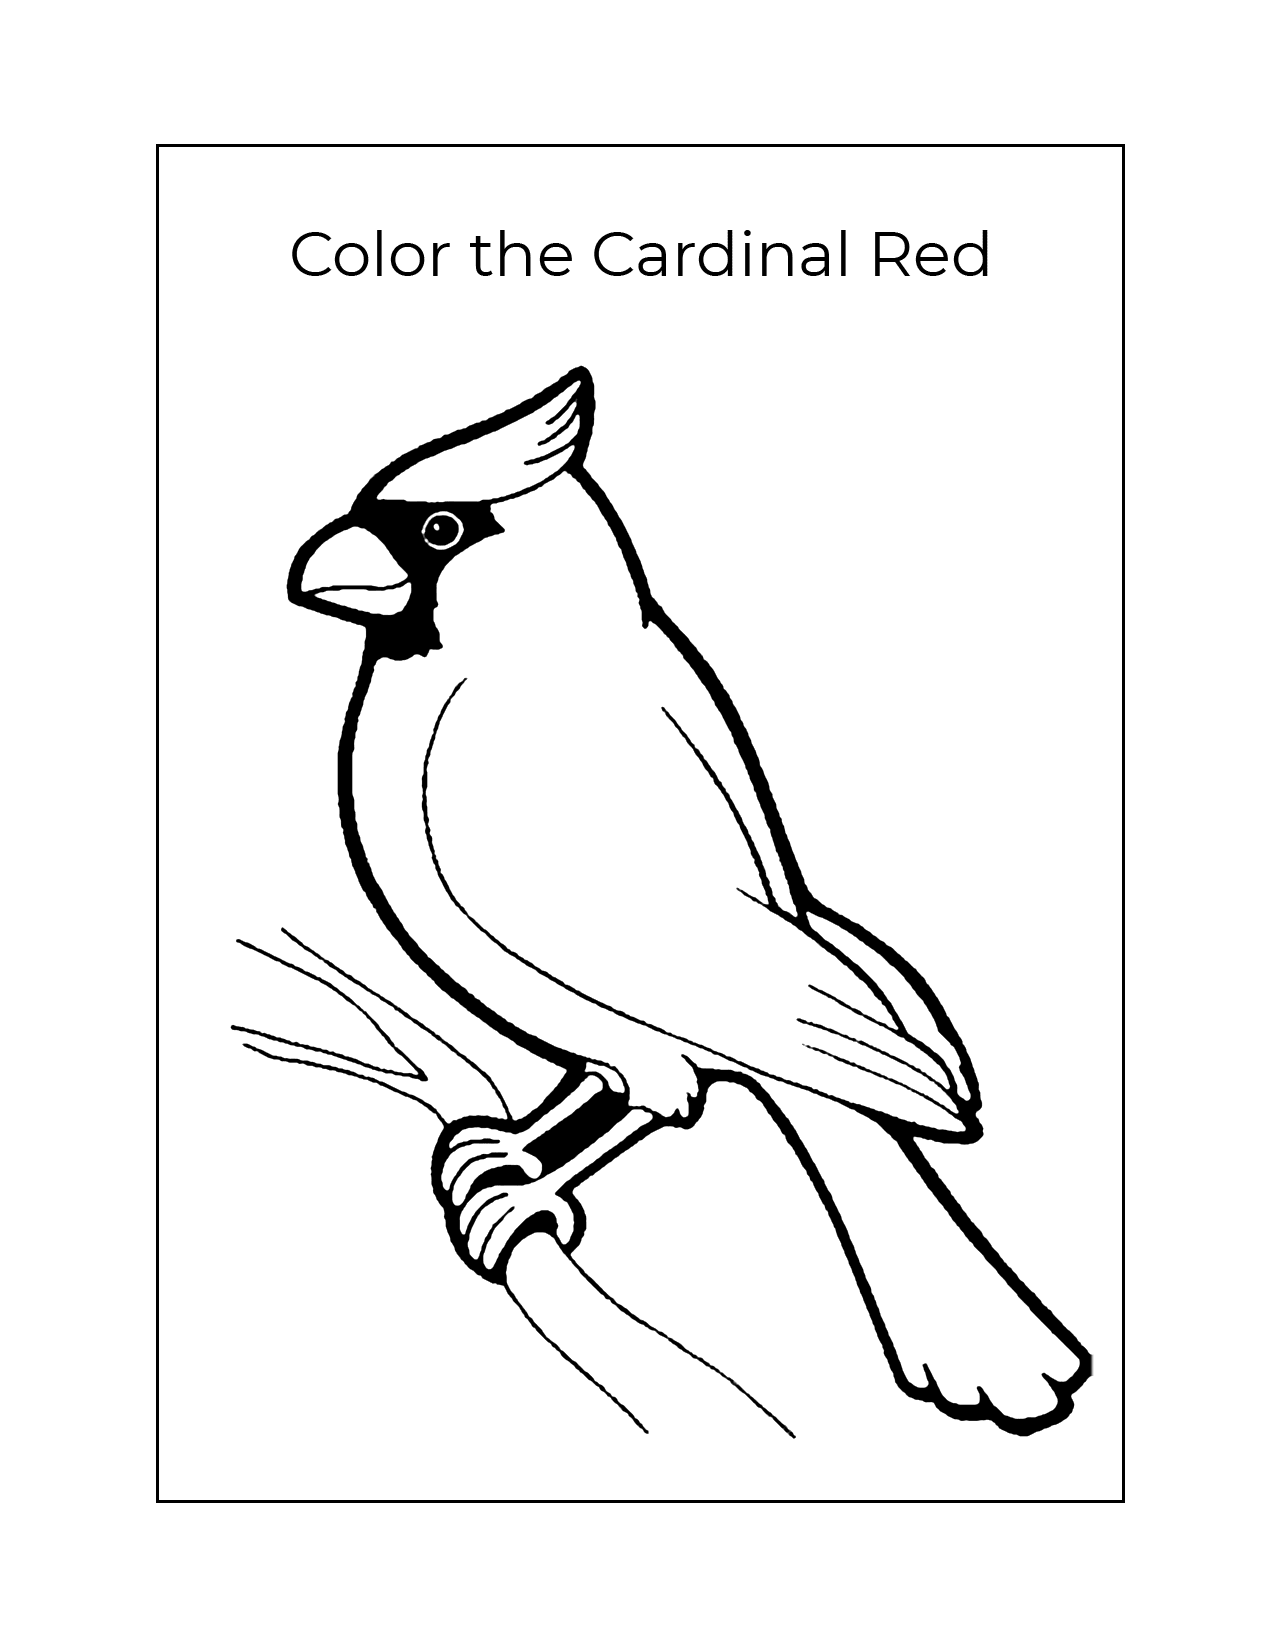 Color The Cardinal Red Worksheet